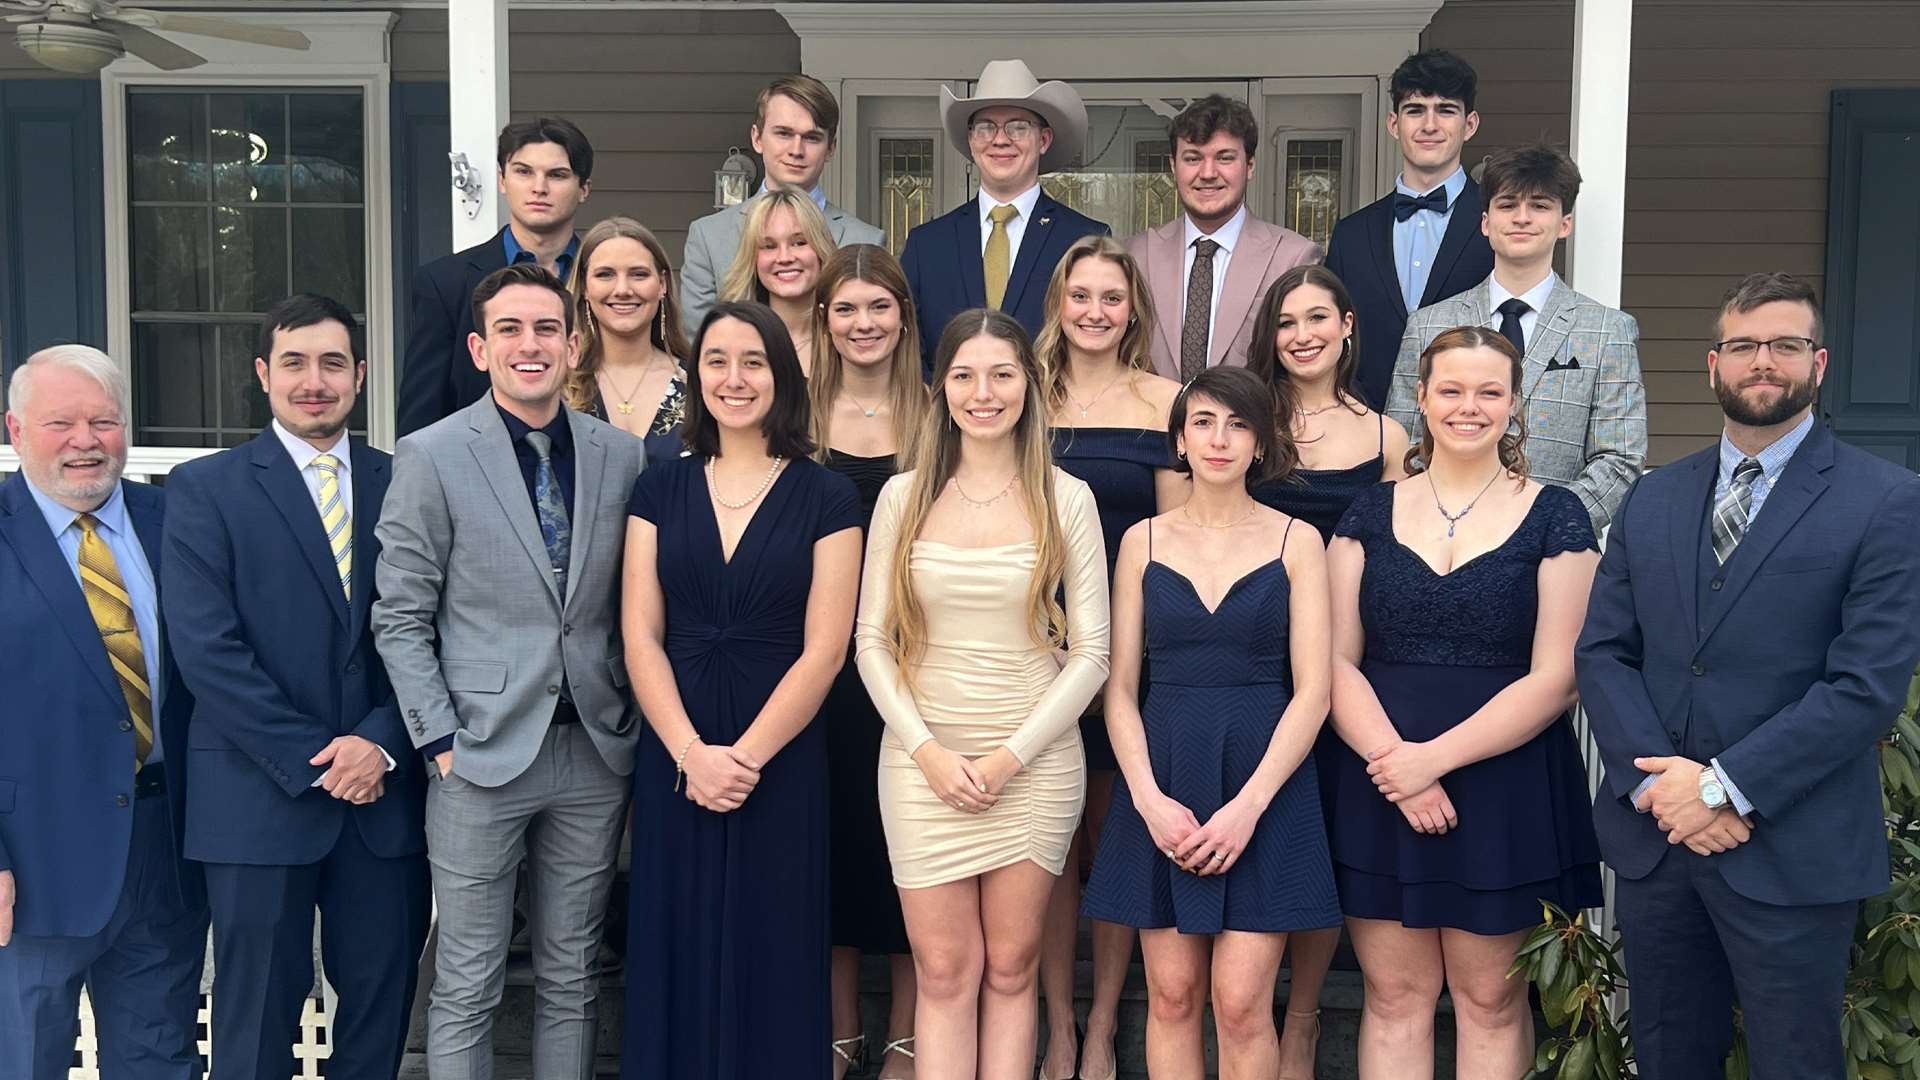 Akron rifle team, all dressed up